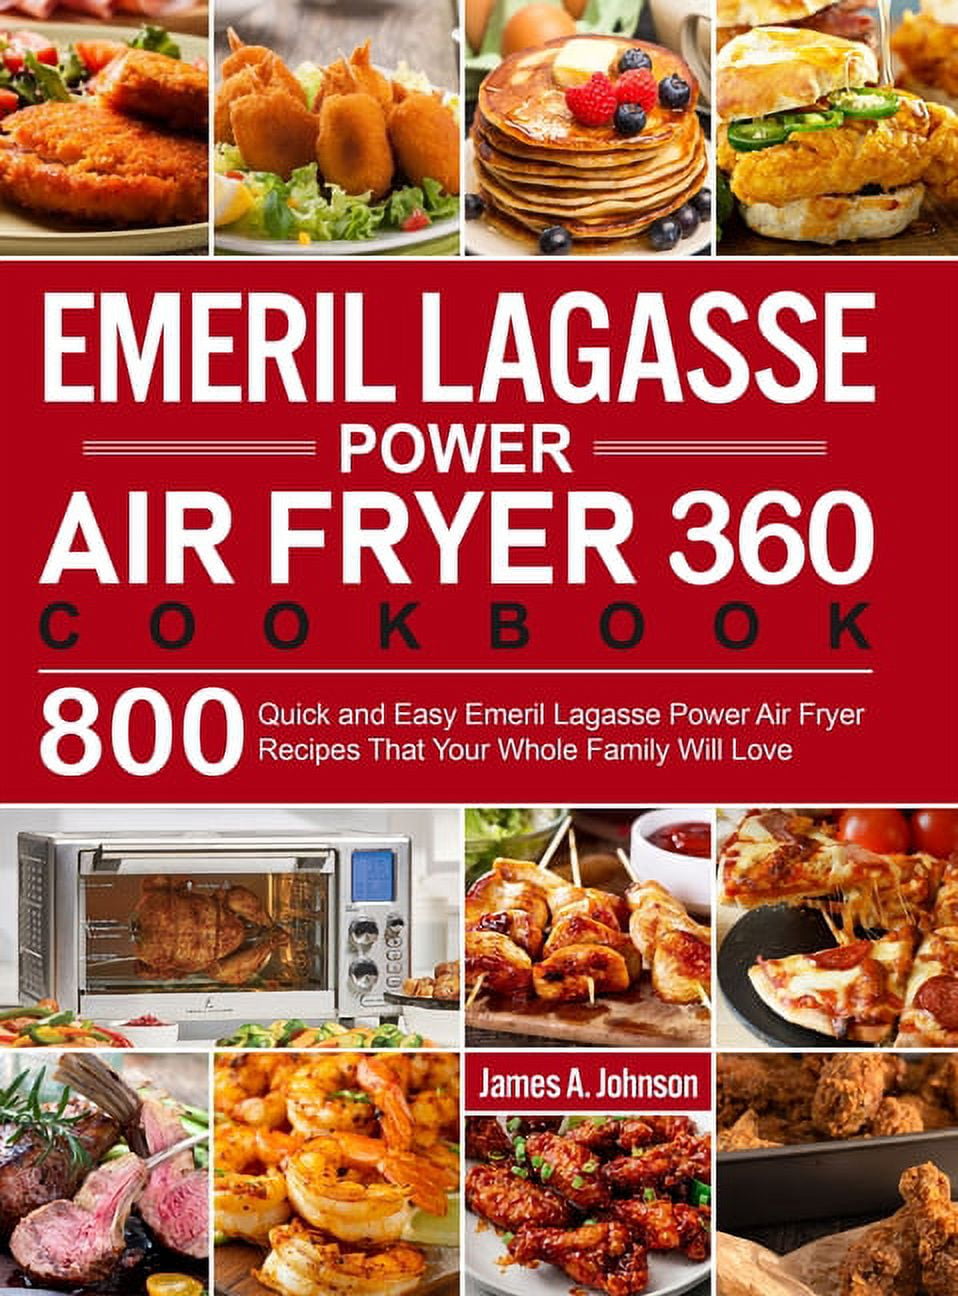 Emeril Lagasse 25-QT Dual Zone French Door 360 Air Fryer Cookbook: 1800  Days of Culinary Excellence, Featuring Quick & Easy Recipes for Air Frying,  Roasting, Pizza Making, Slow Cooking, and More!: Fllington